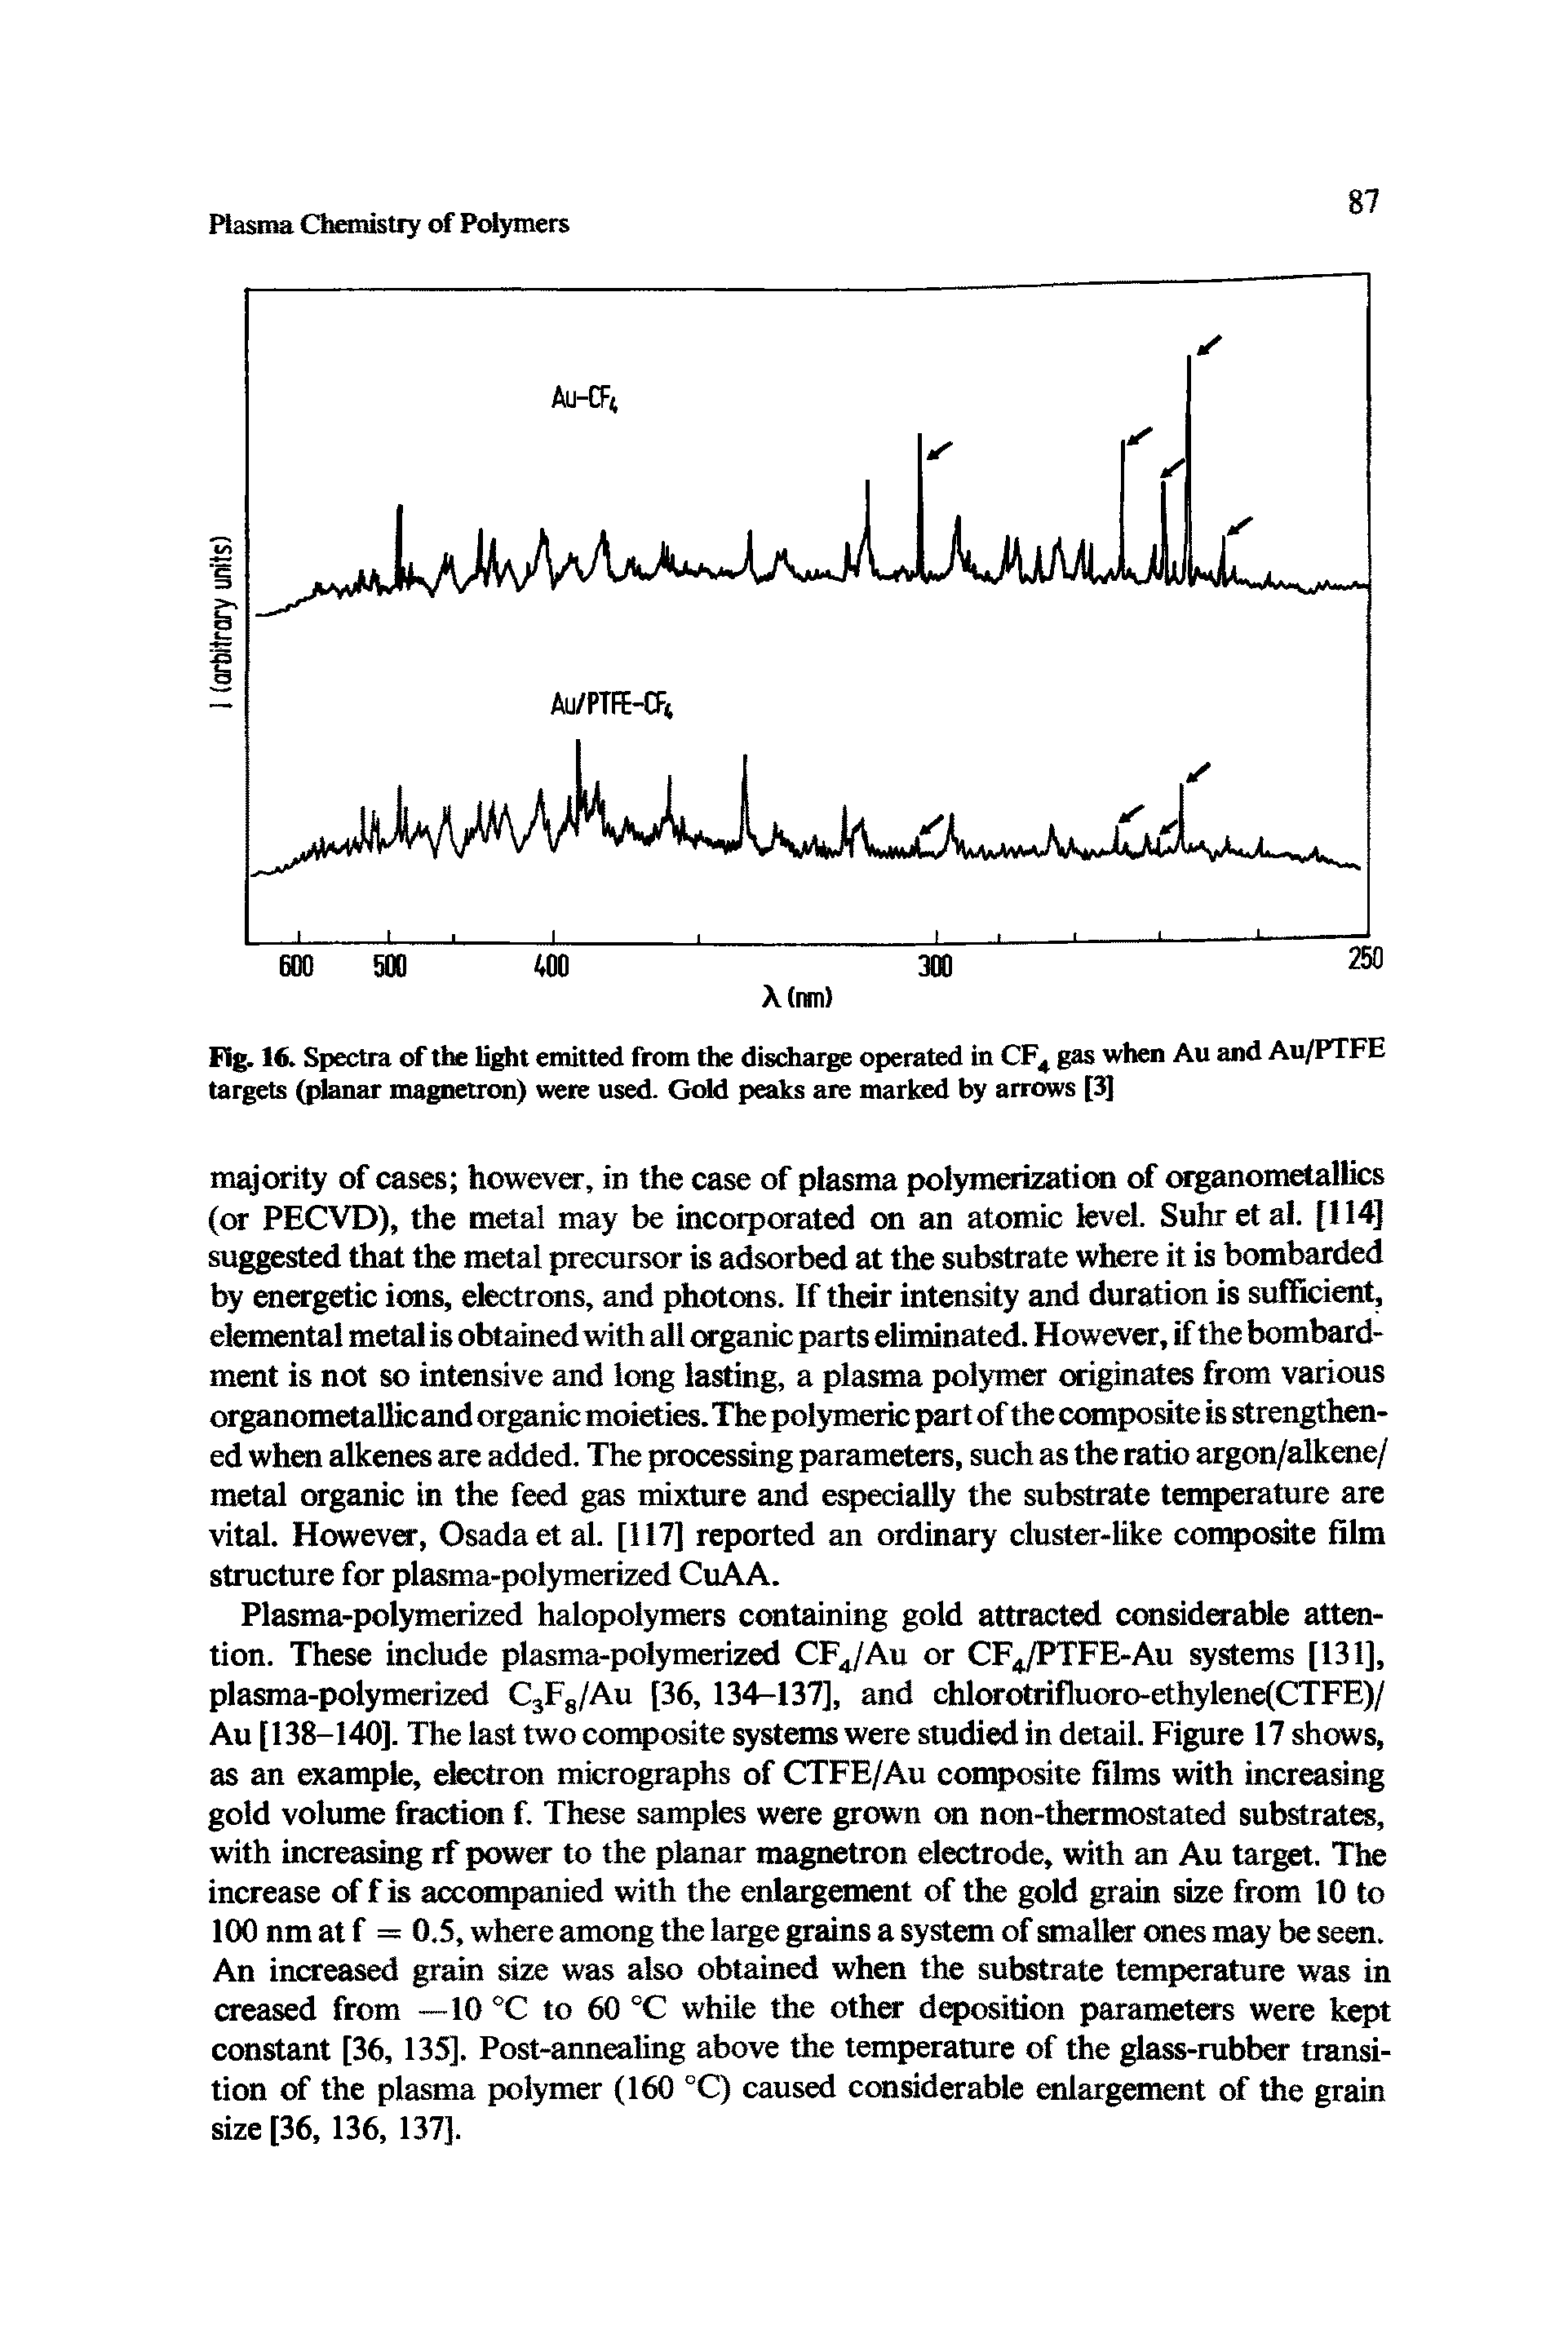 Fig. 16. Spectra of the light emitted from the disdiarge operated in CF gas when Au and Au/PTFE targets (planar magnetron) were used. Gcdd peaks are marked by arrows...